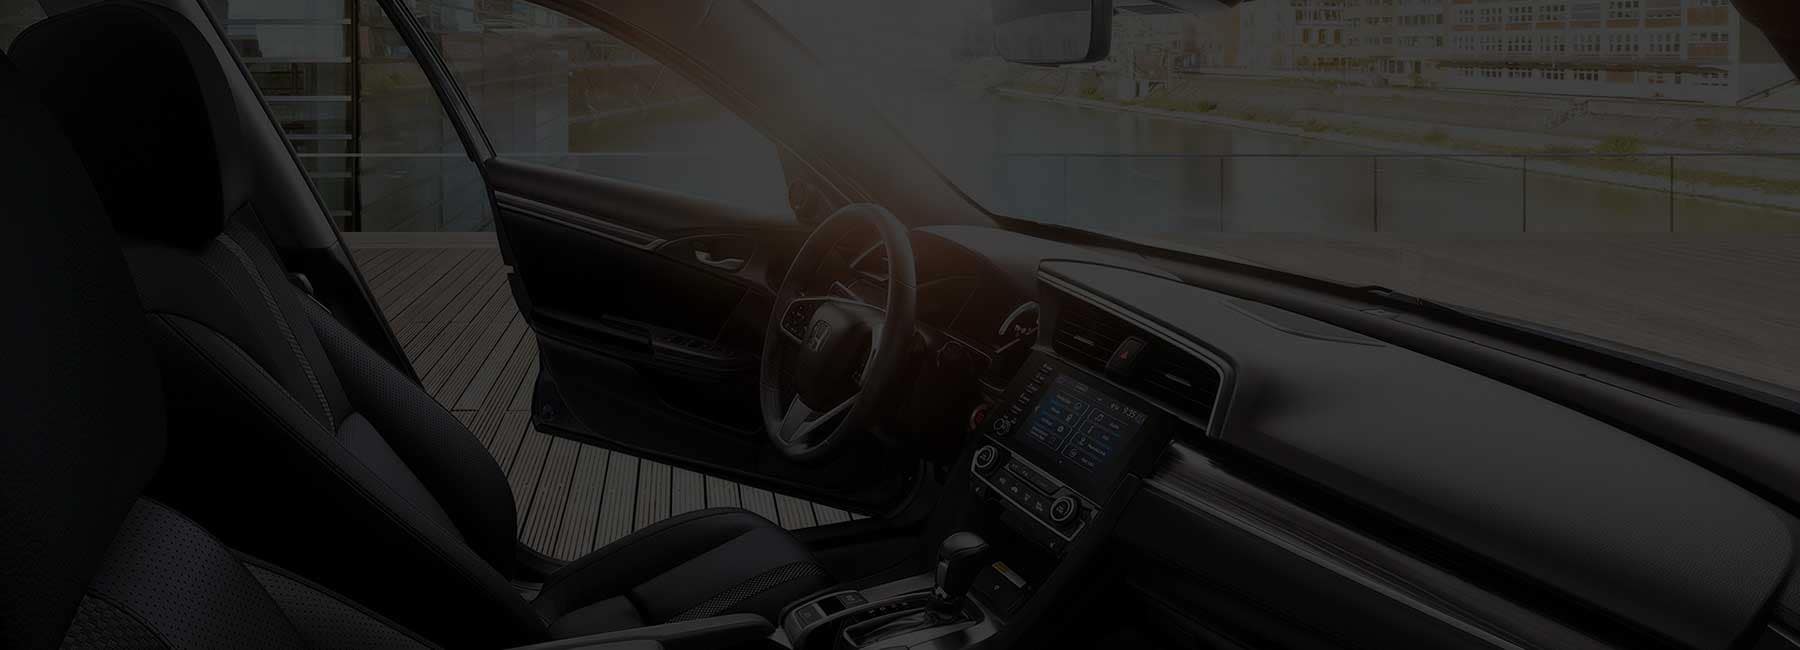 View of the dashboard inside a Honda